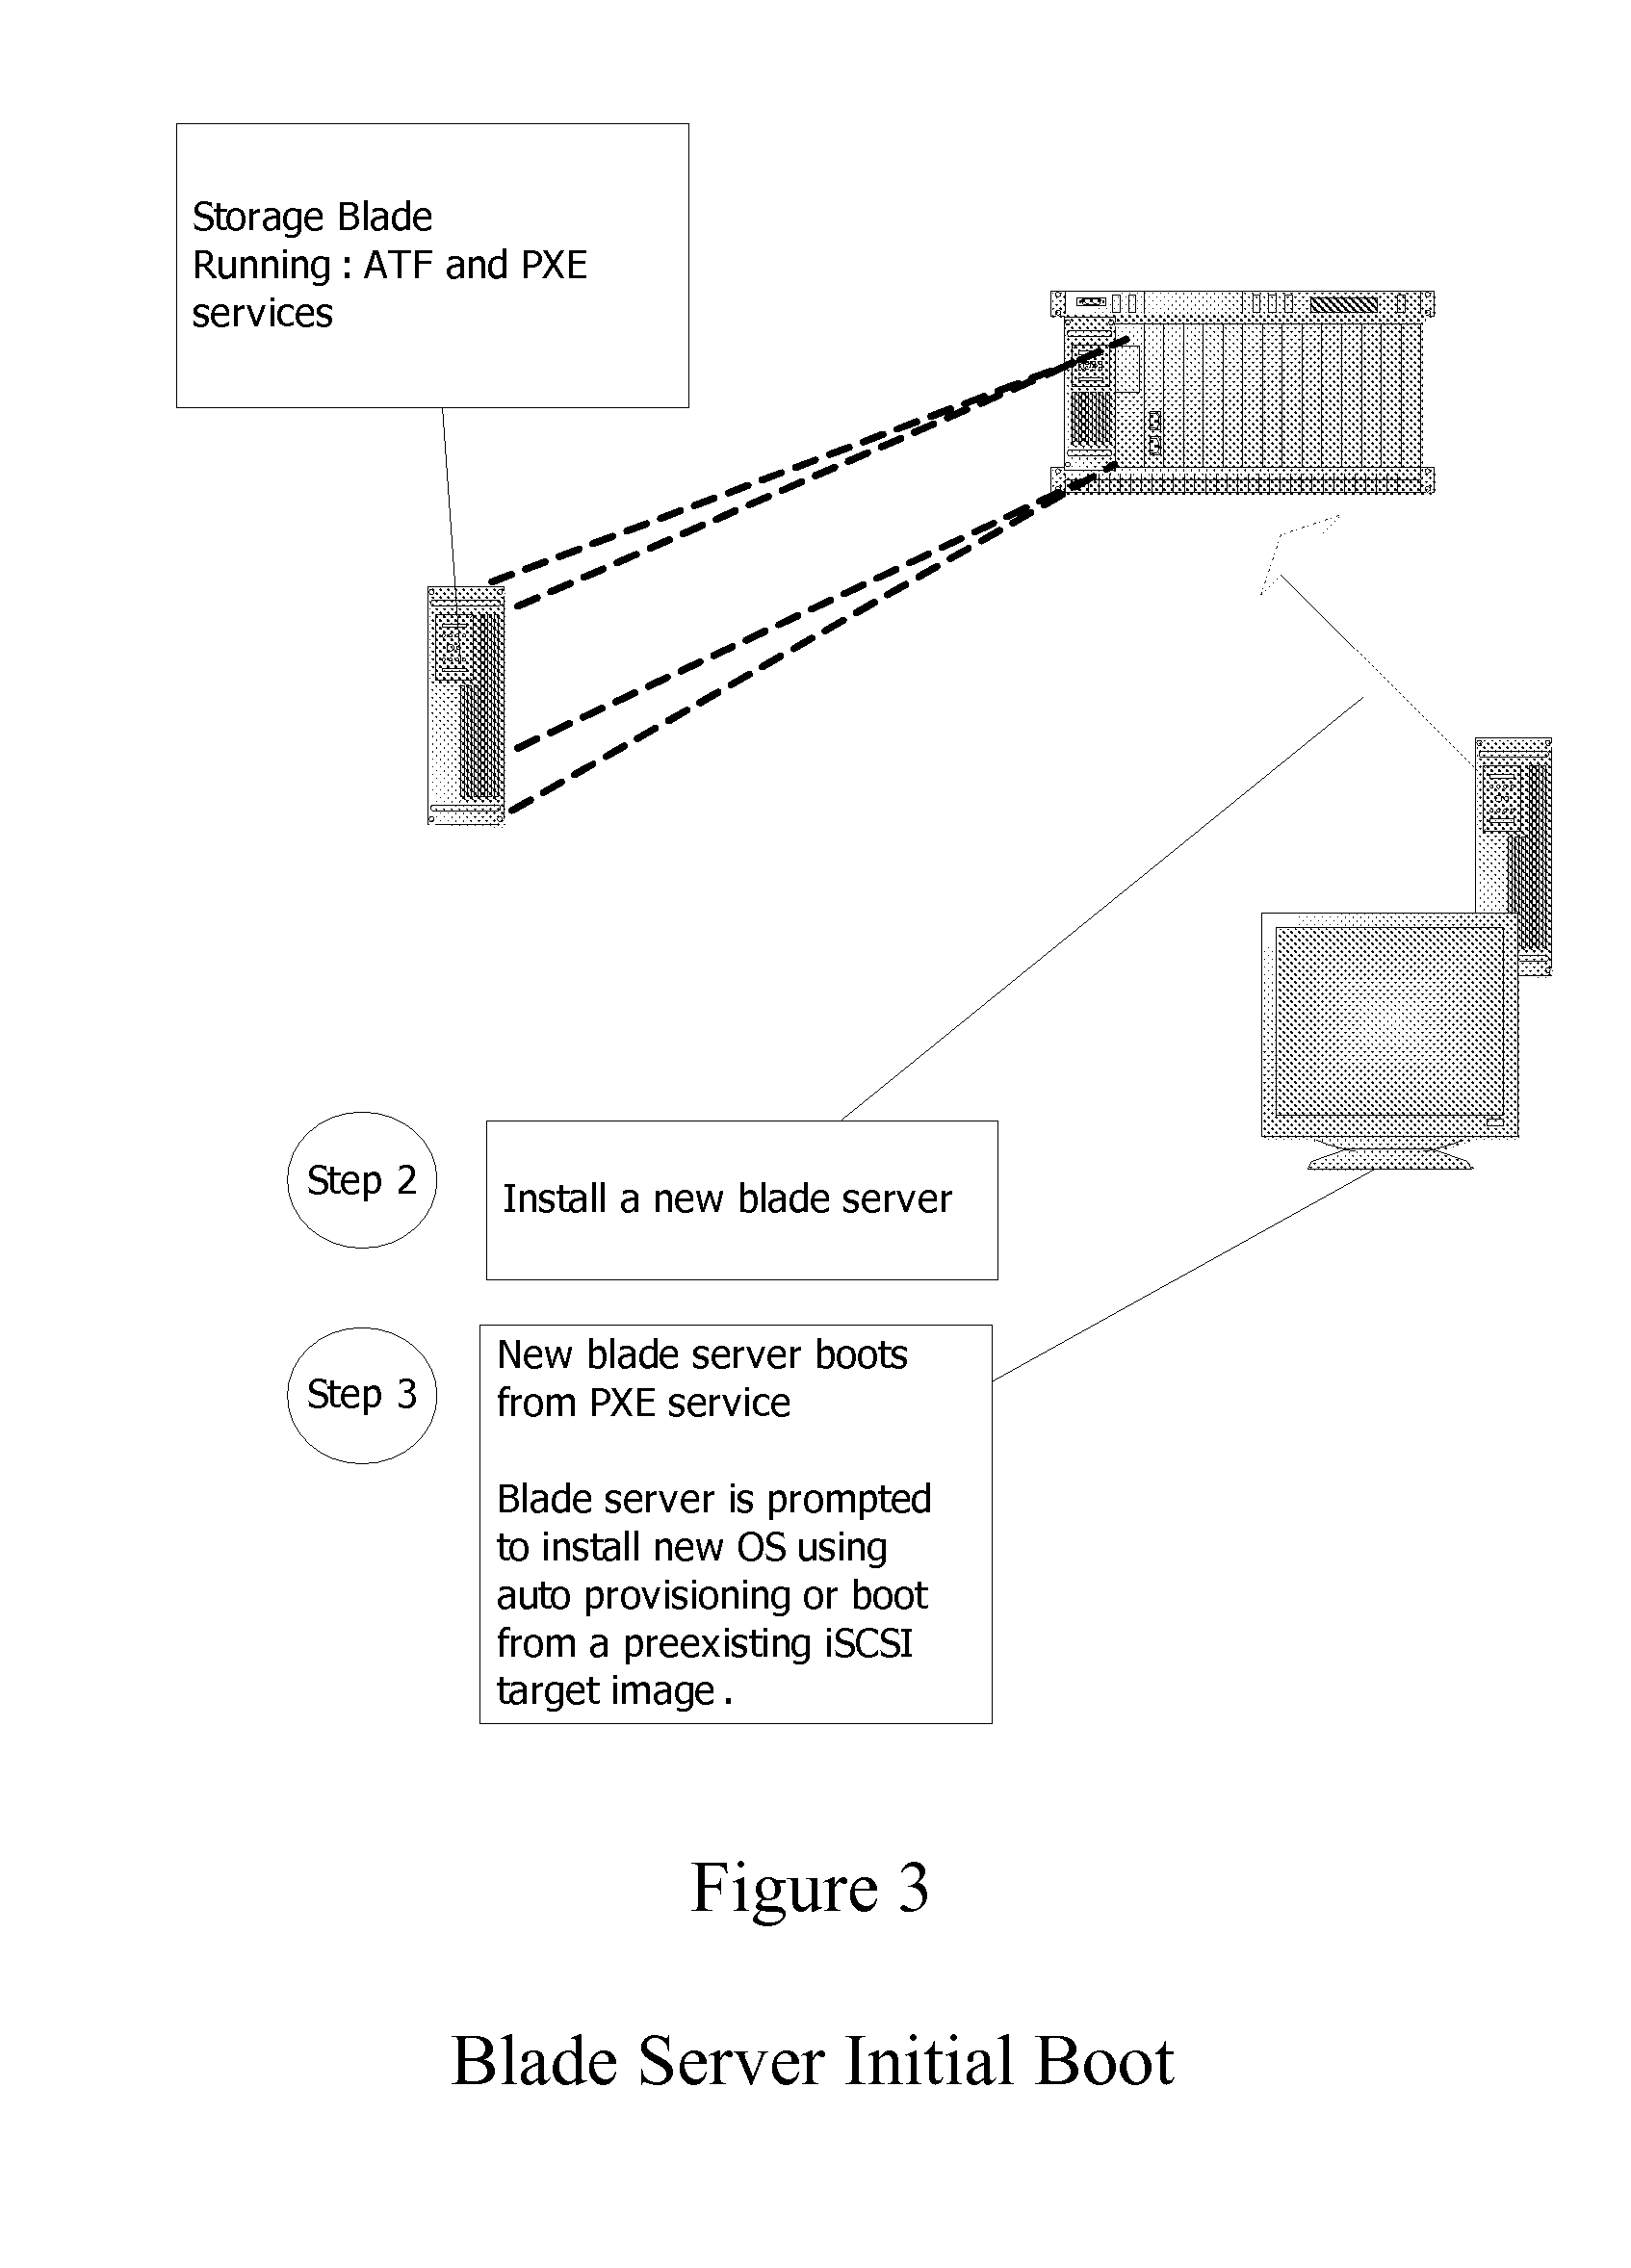 Systems and methods for automatic provisioning of storage and operating system installation